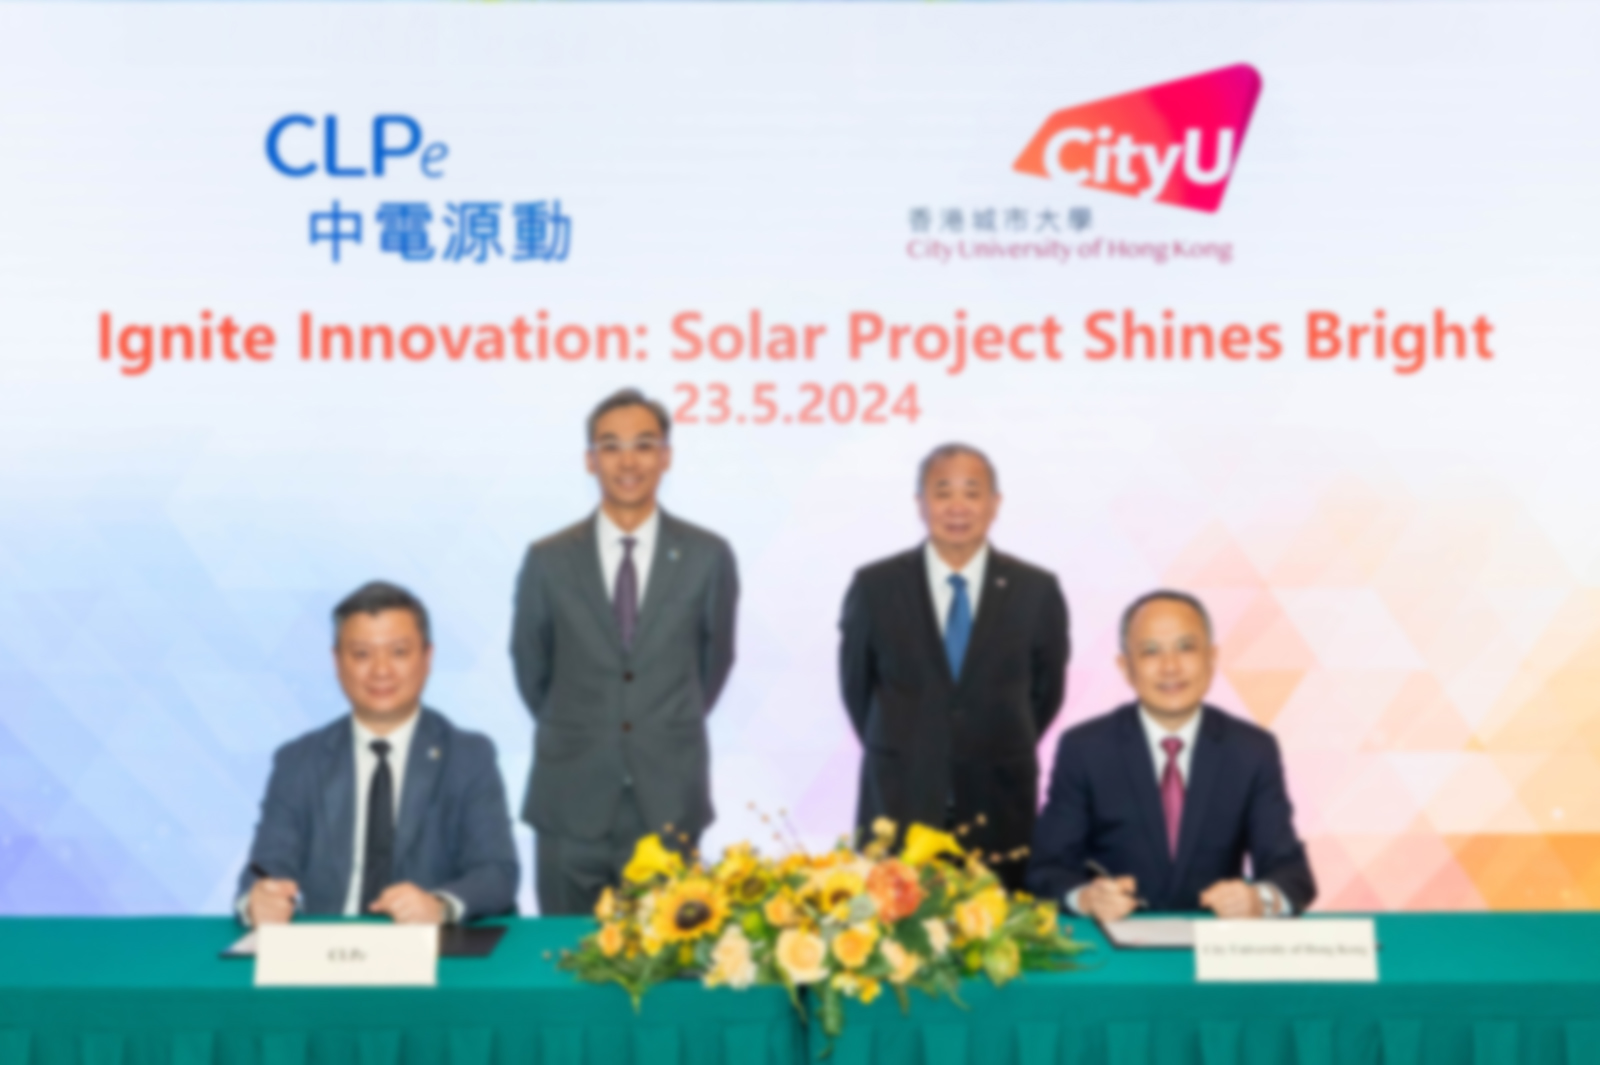 CLPe teams up with CityUHK to install solar power system across the campus